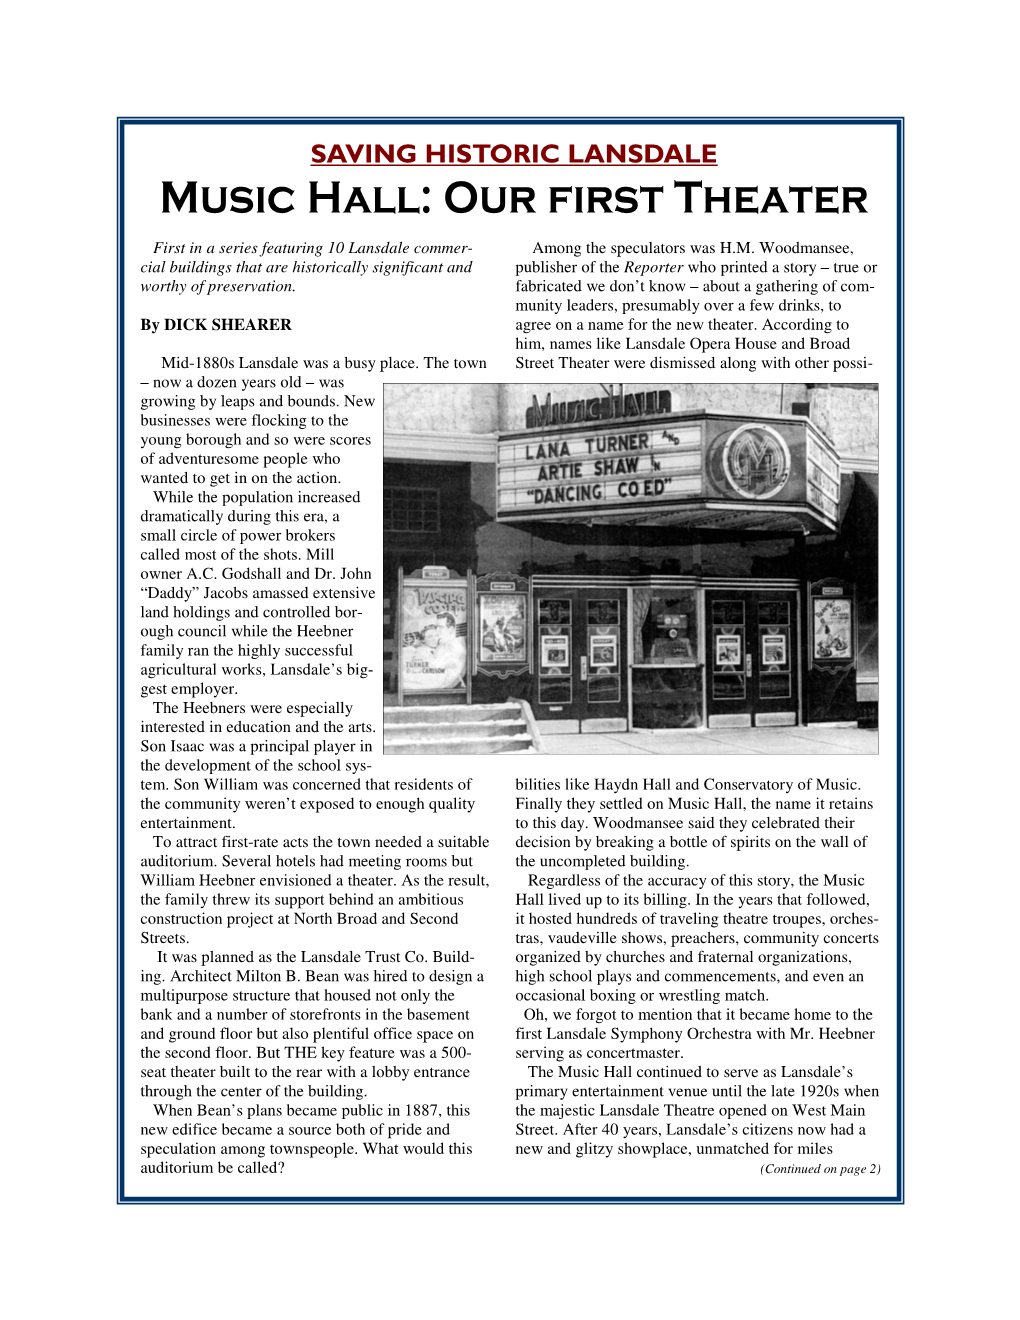 Music Hall: Our First Theater